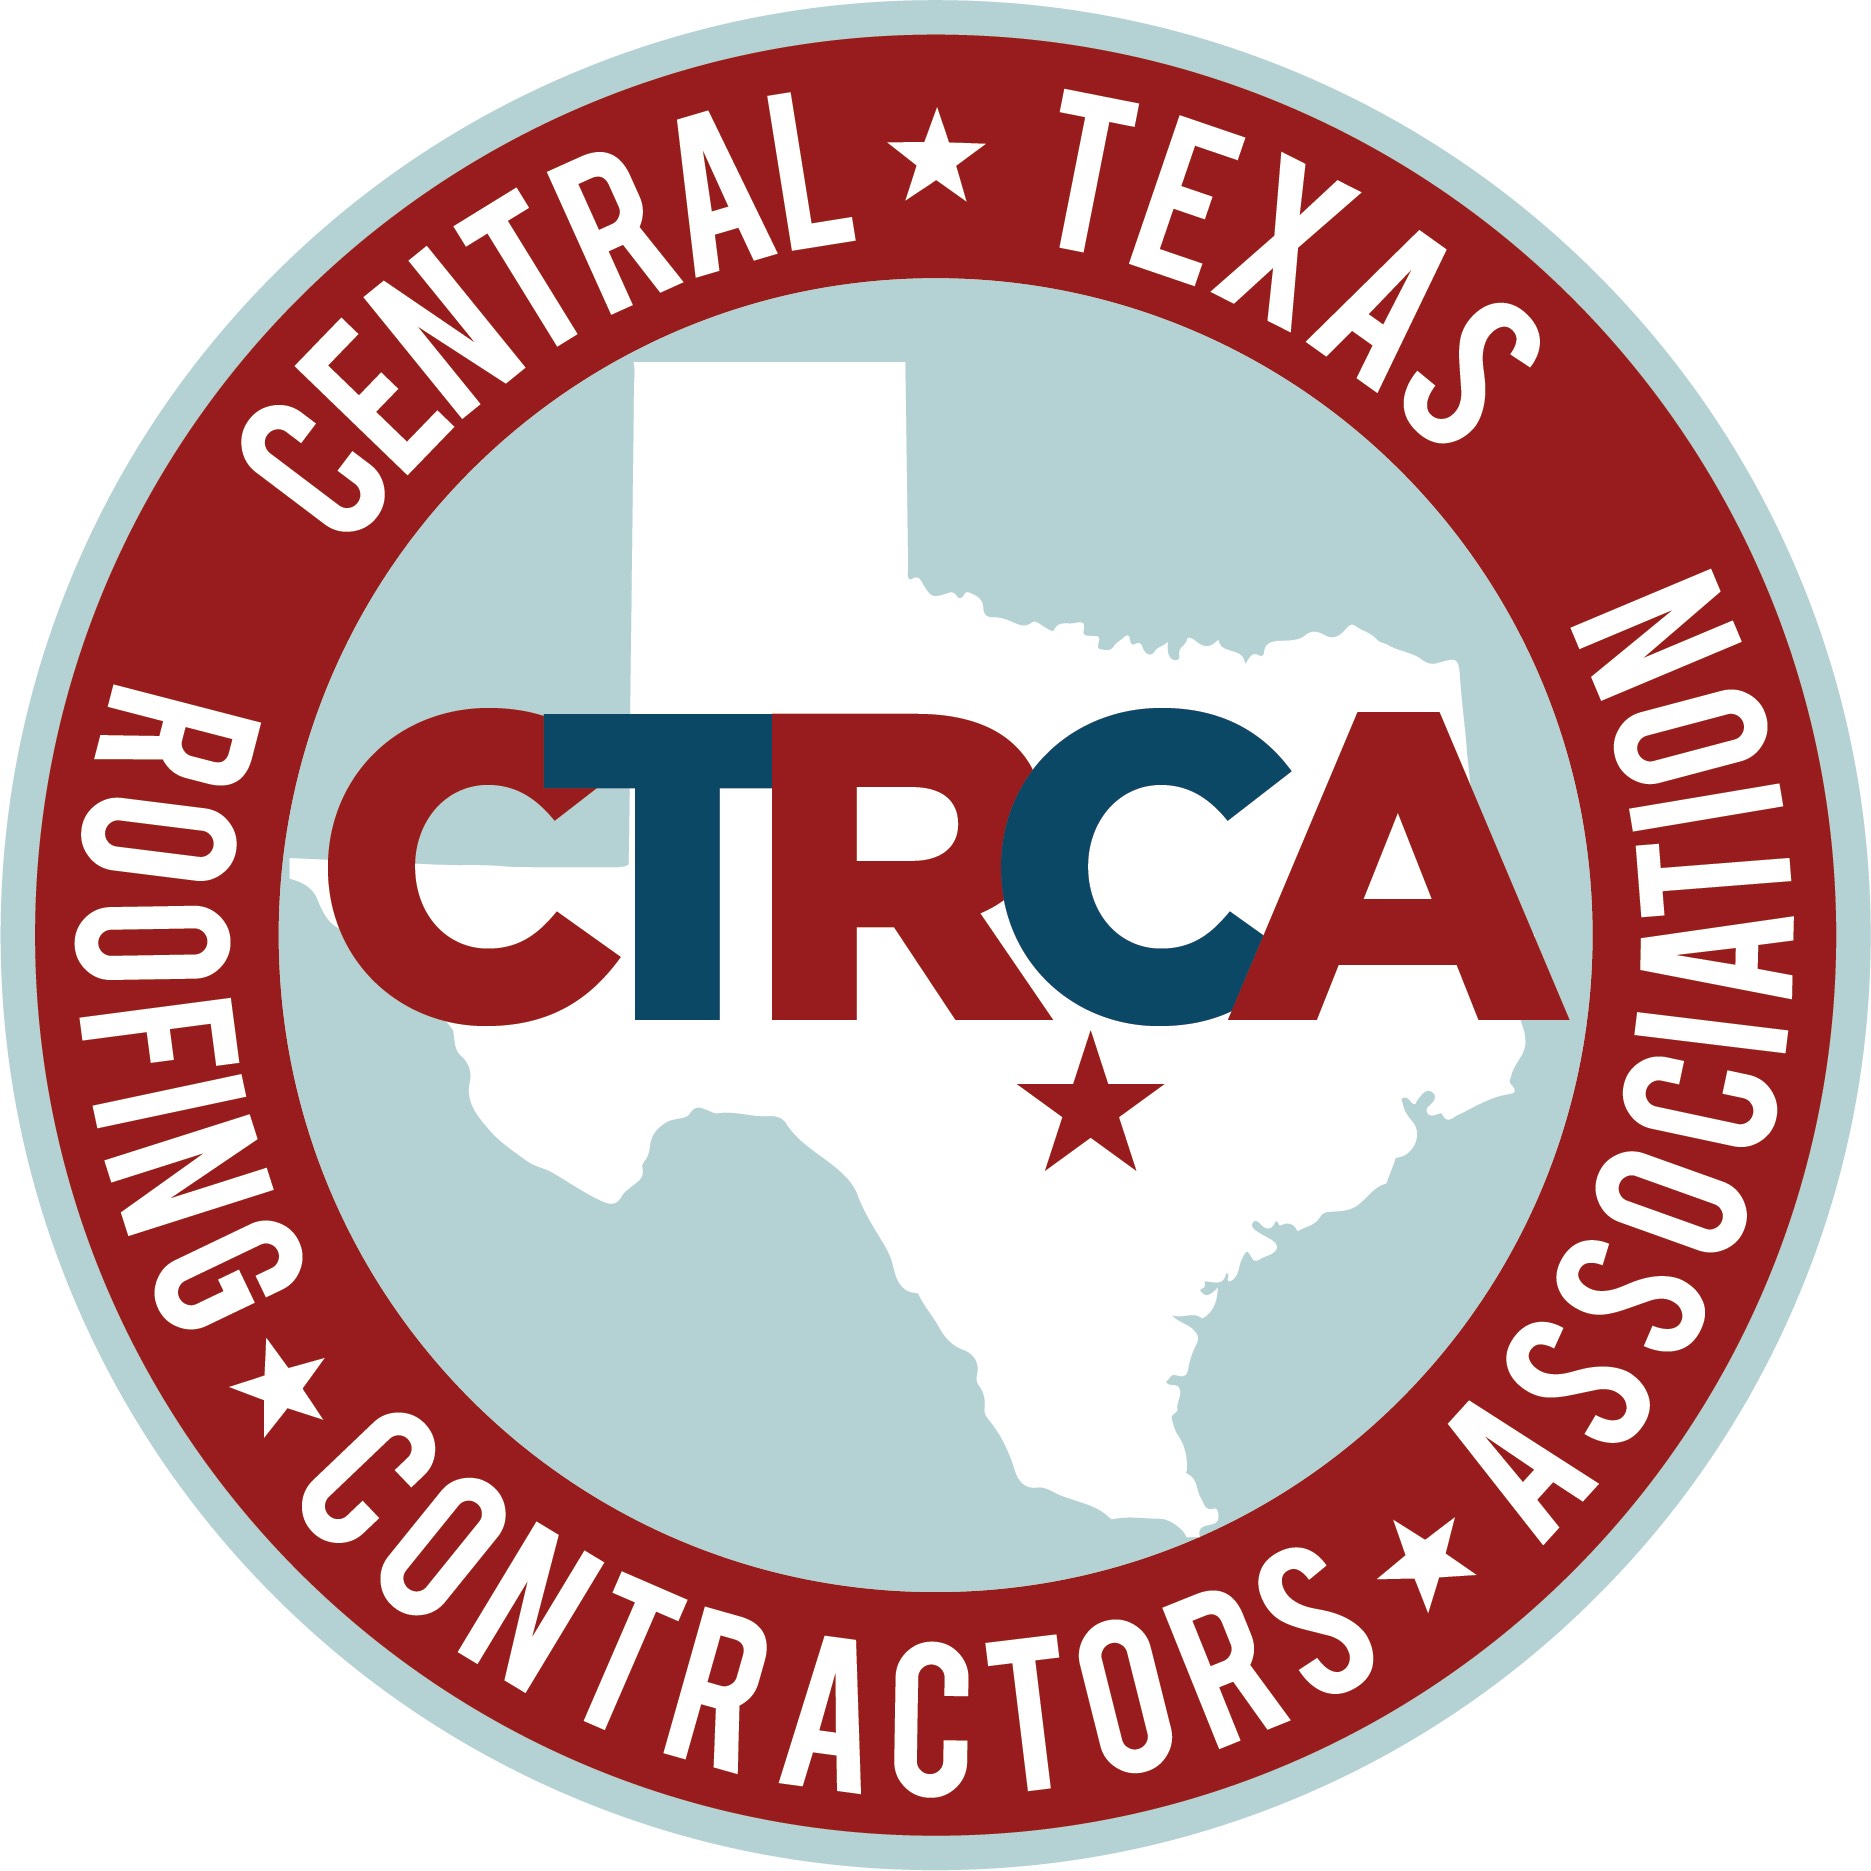 central Texas roofing contractors